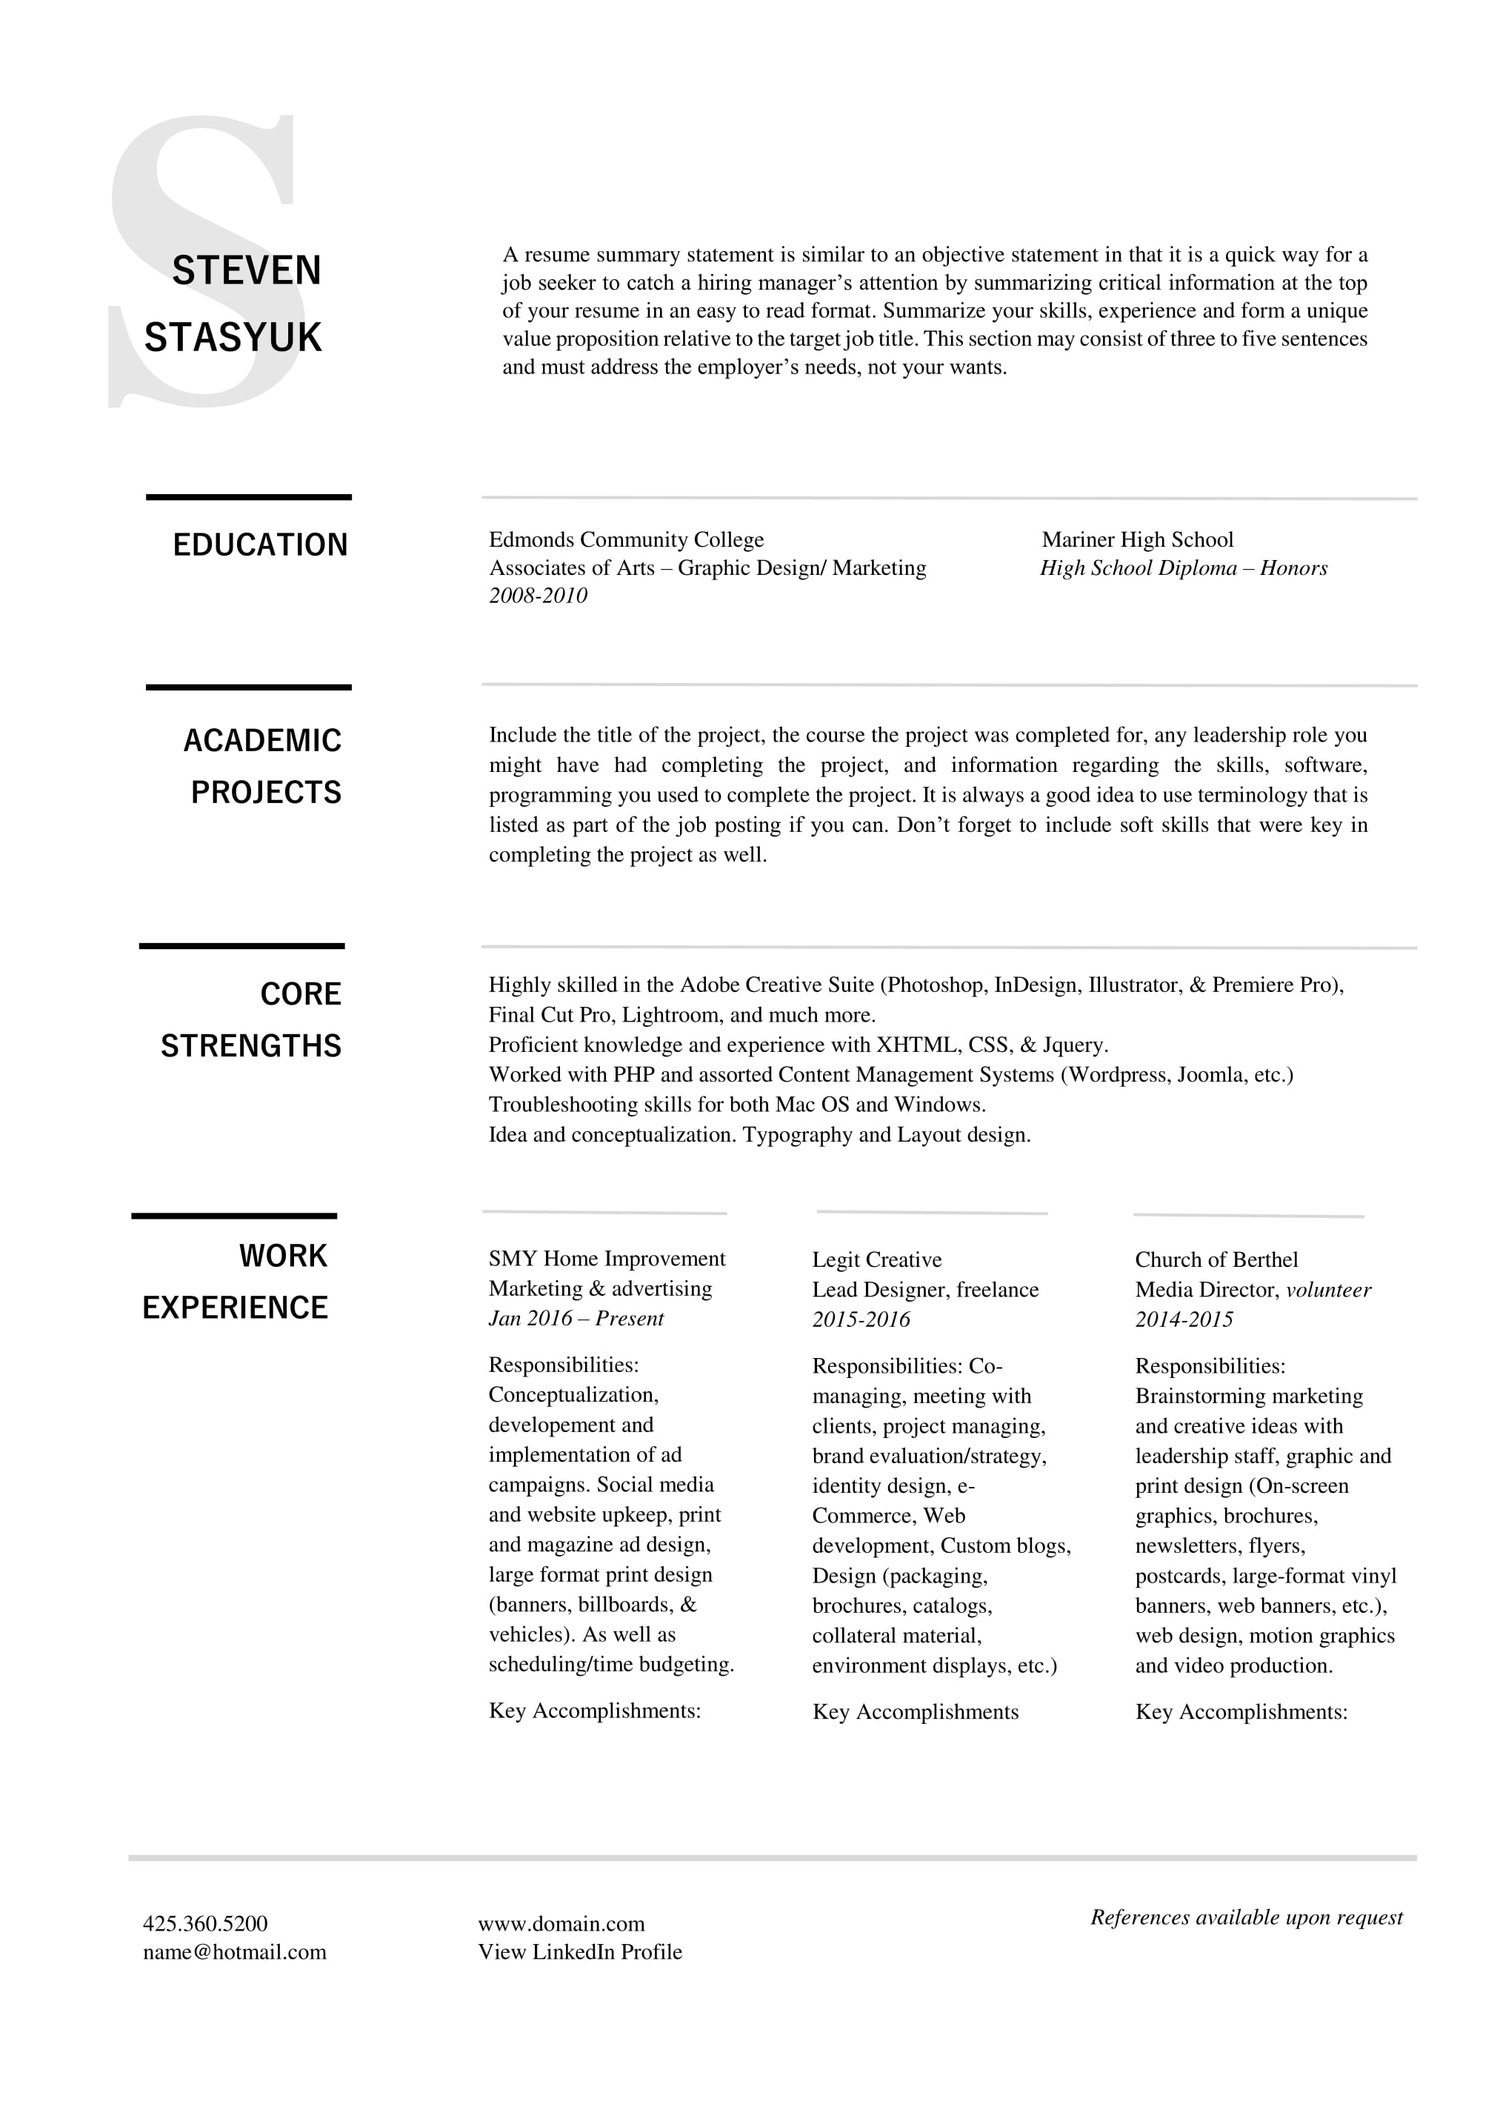 Recent Graduate Cover Letter Sample from static1.squarespace.com